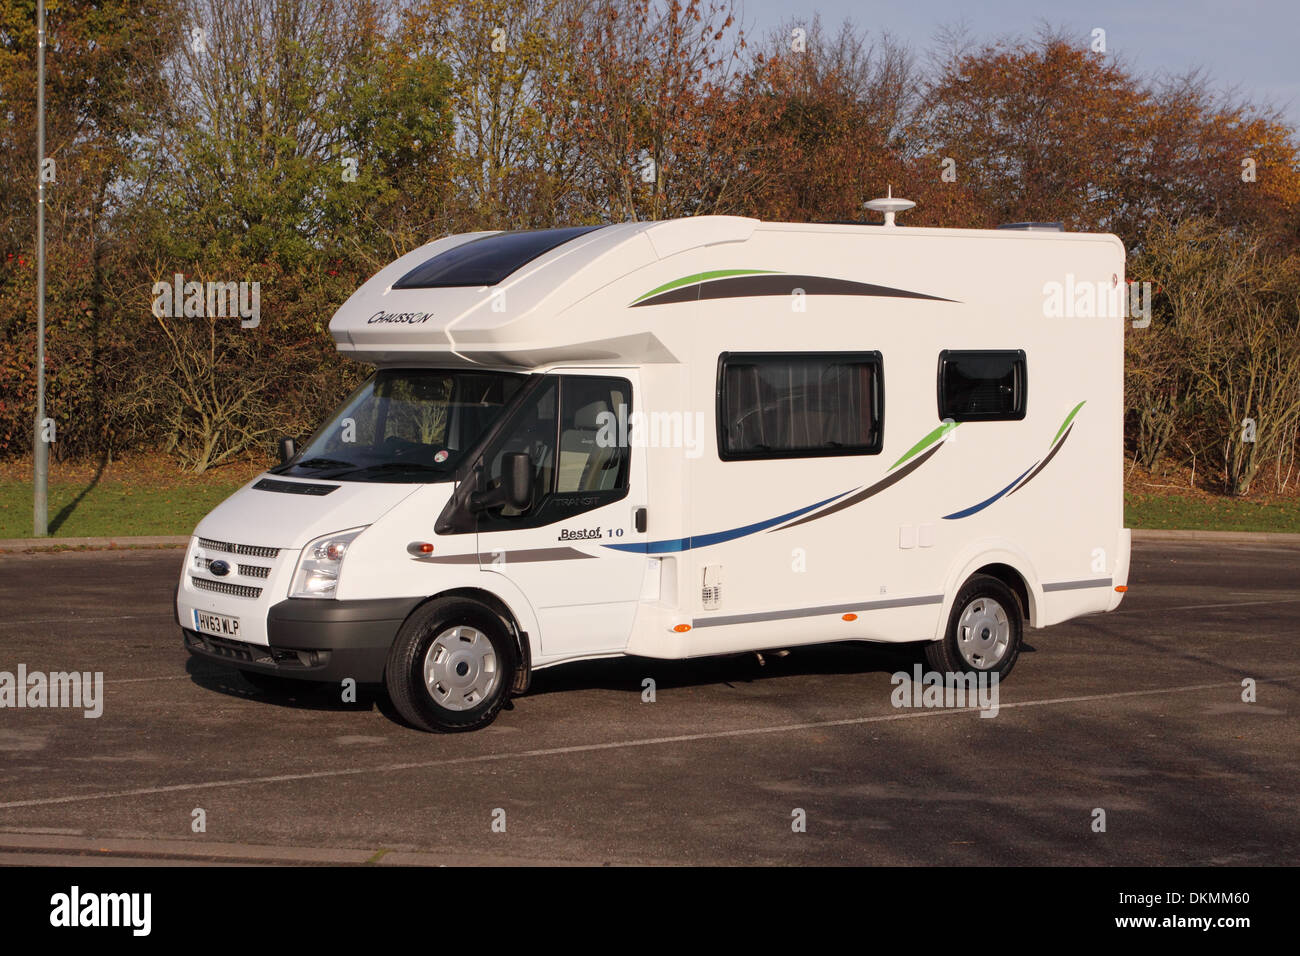 Chausson High Resolution Stock Photography and Images - Alamy